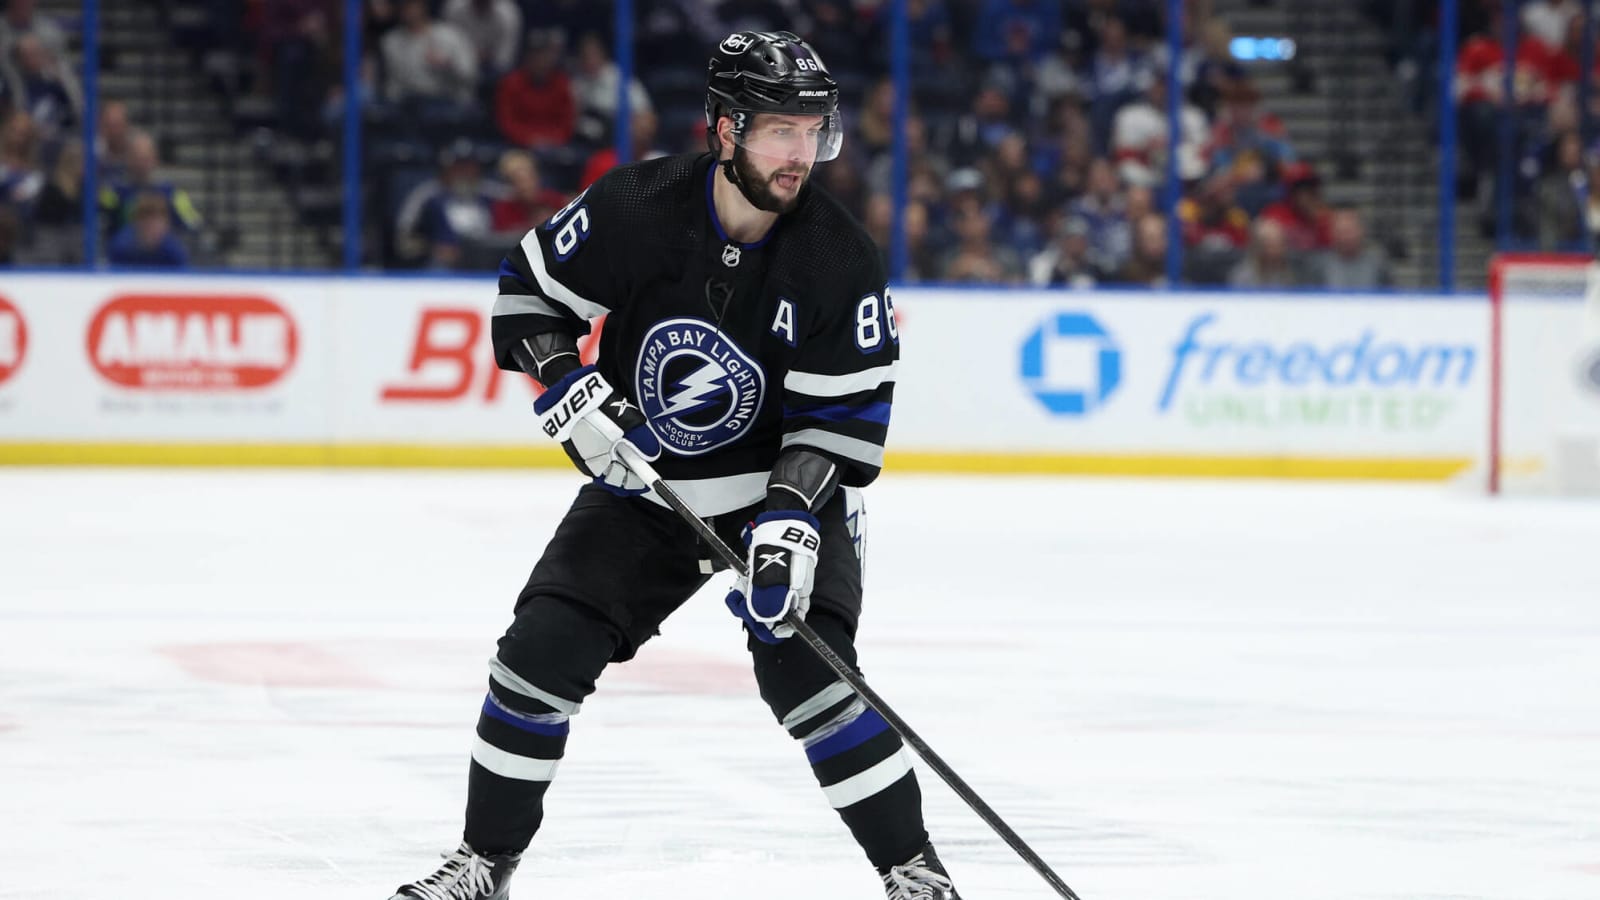 Is Nikita Kucherov’s season enough to win the Hart Trophy and Valeri Nichuskin cleared from NHL/NHLPA player assistance program